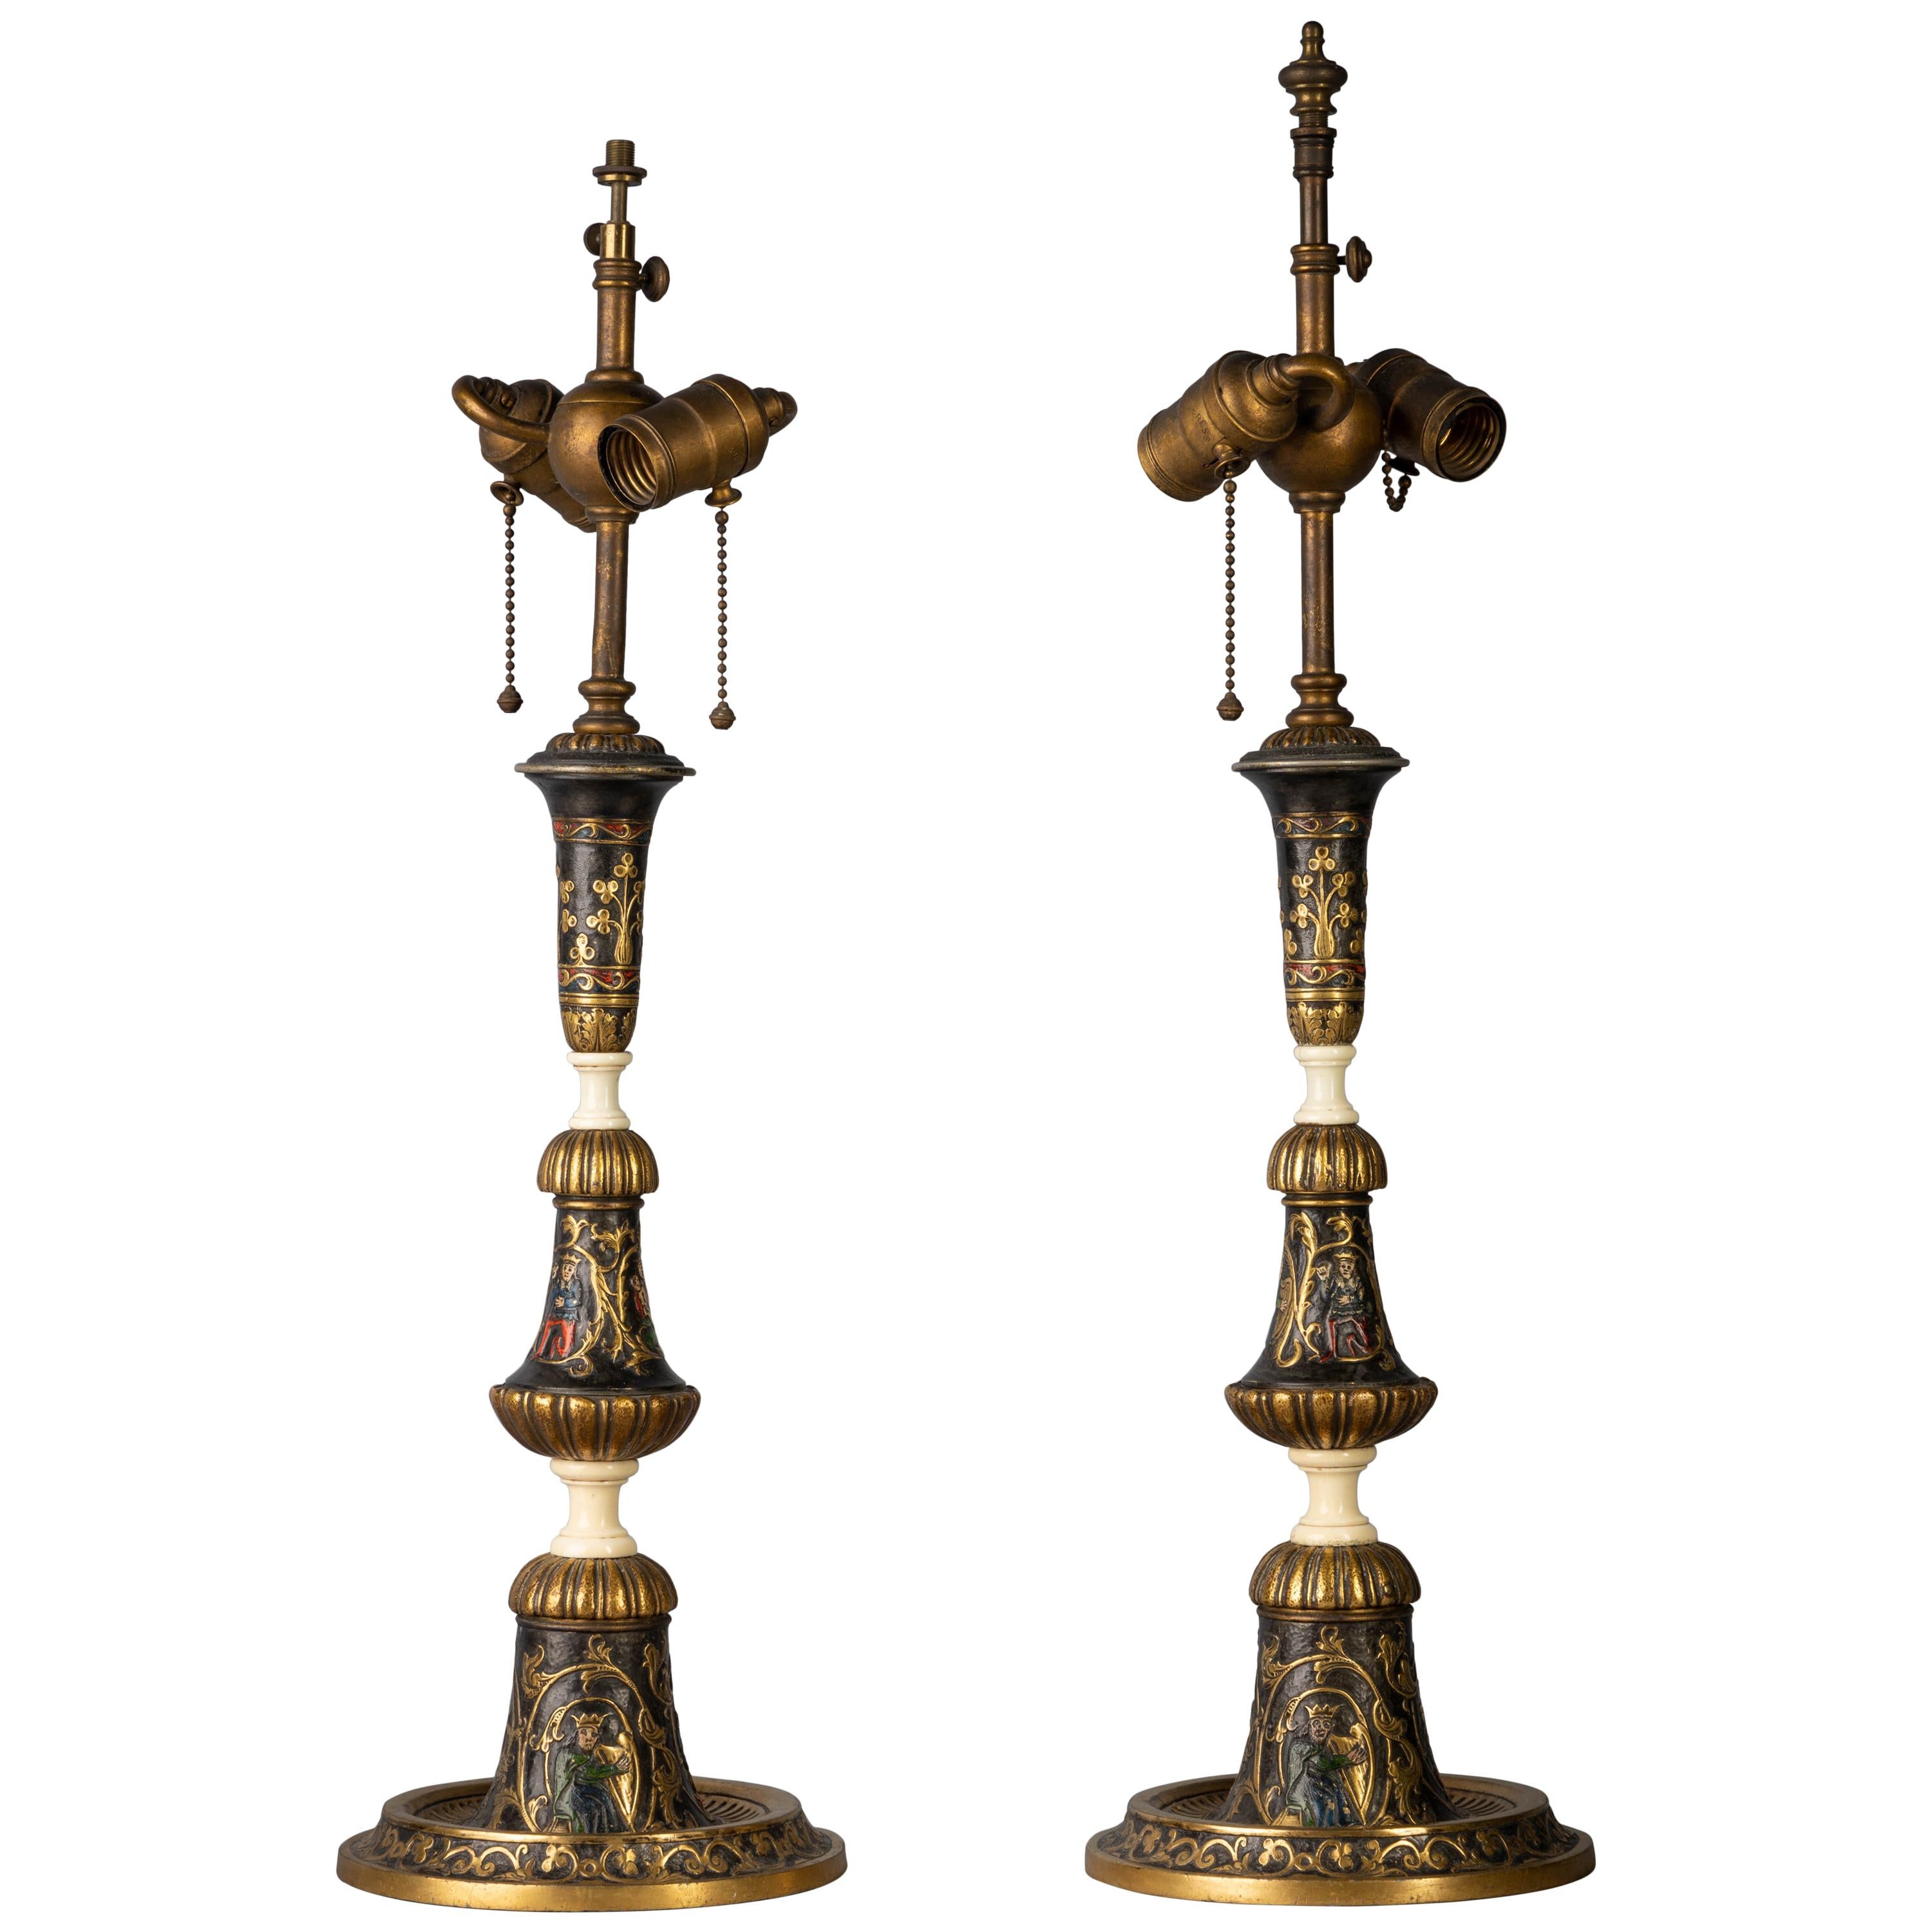 Pair of Large Gilt, Patinated and Enameled Bronze Candlestick Lamps, circa 1900 For Sale